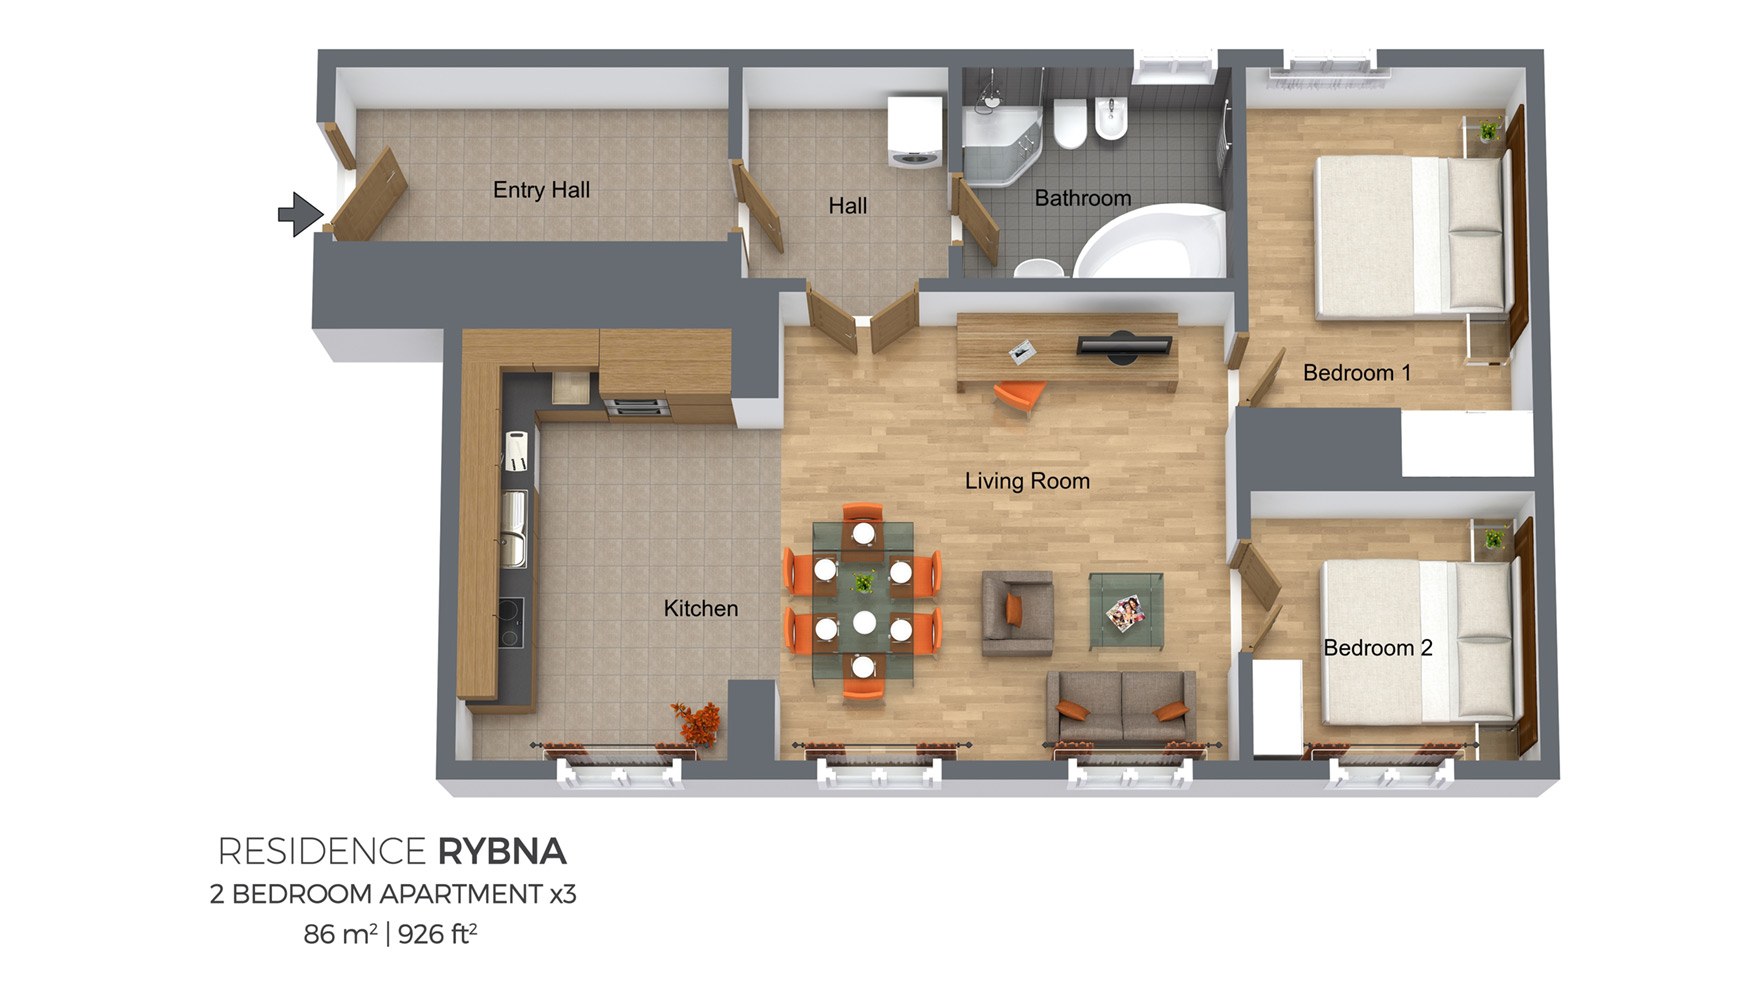 Floorplan of a two bedroom apartment type 3 in Residence Rybna